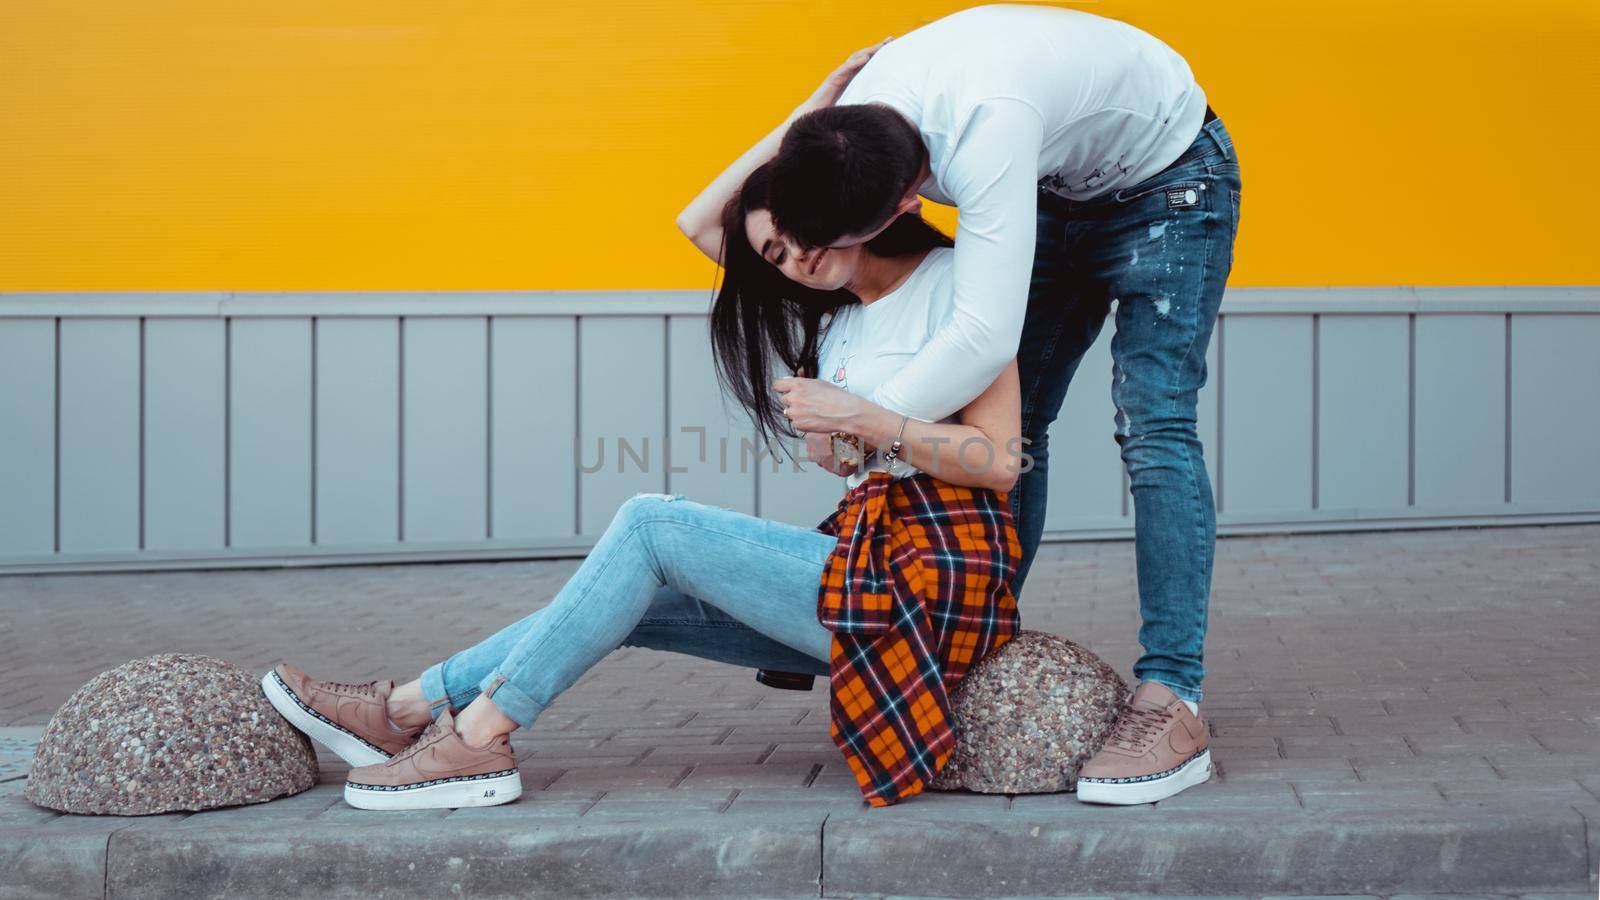 Image of Young lovely couple posing together and hugging over yellow background